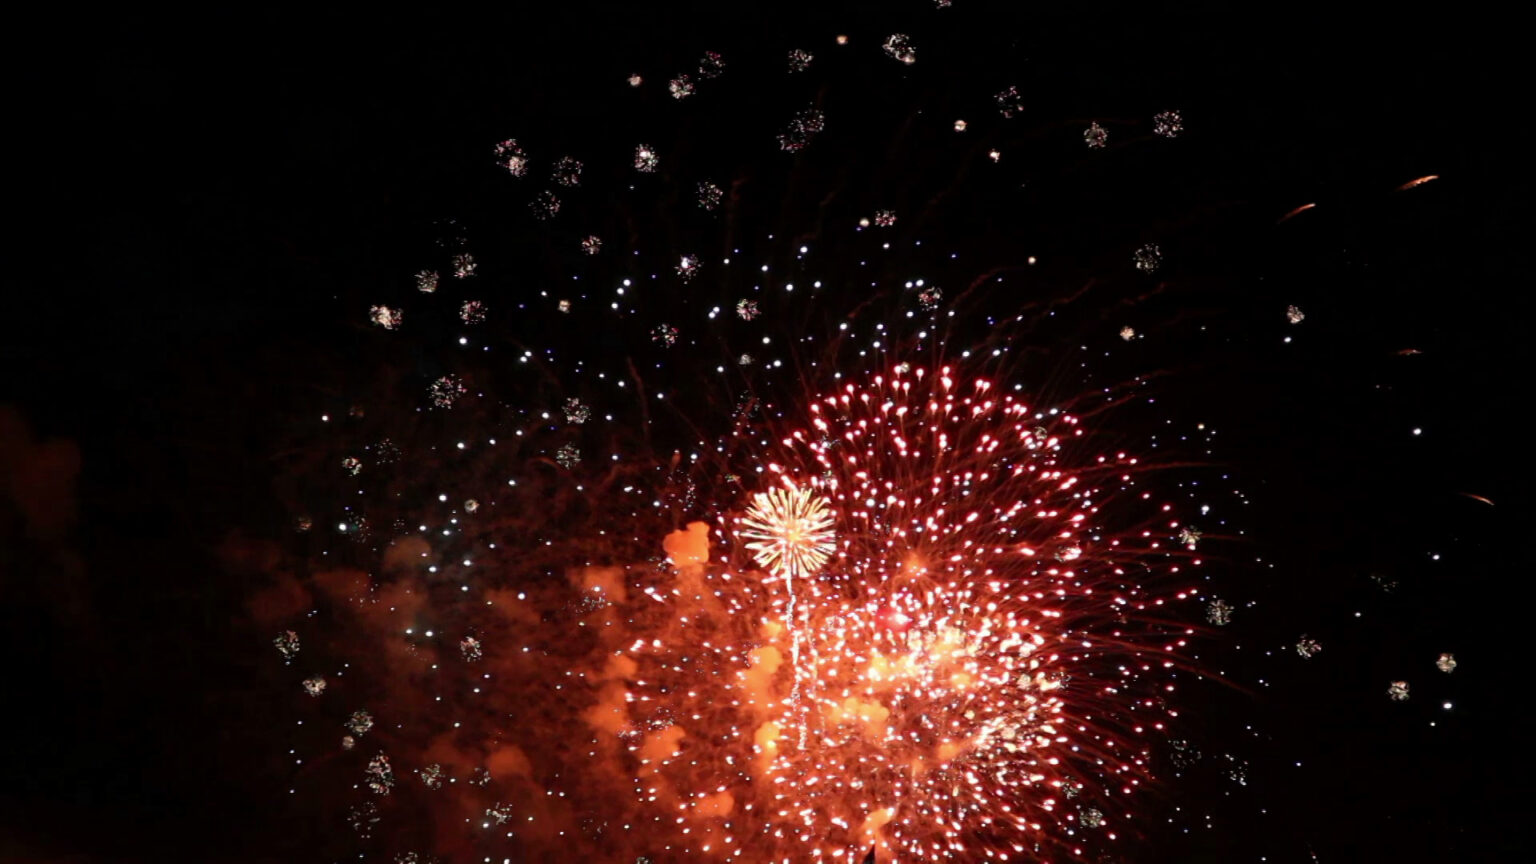 Multiple aerial fireworks explode during a display in a dark night sky.